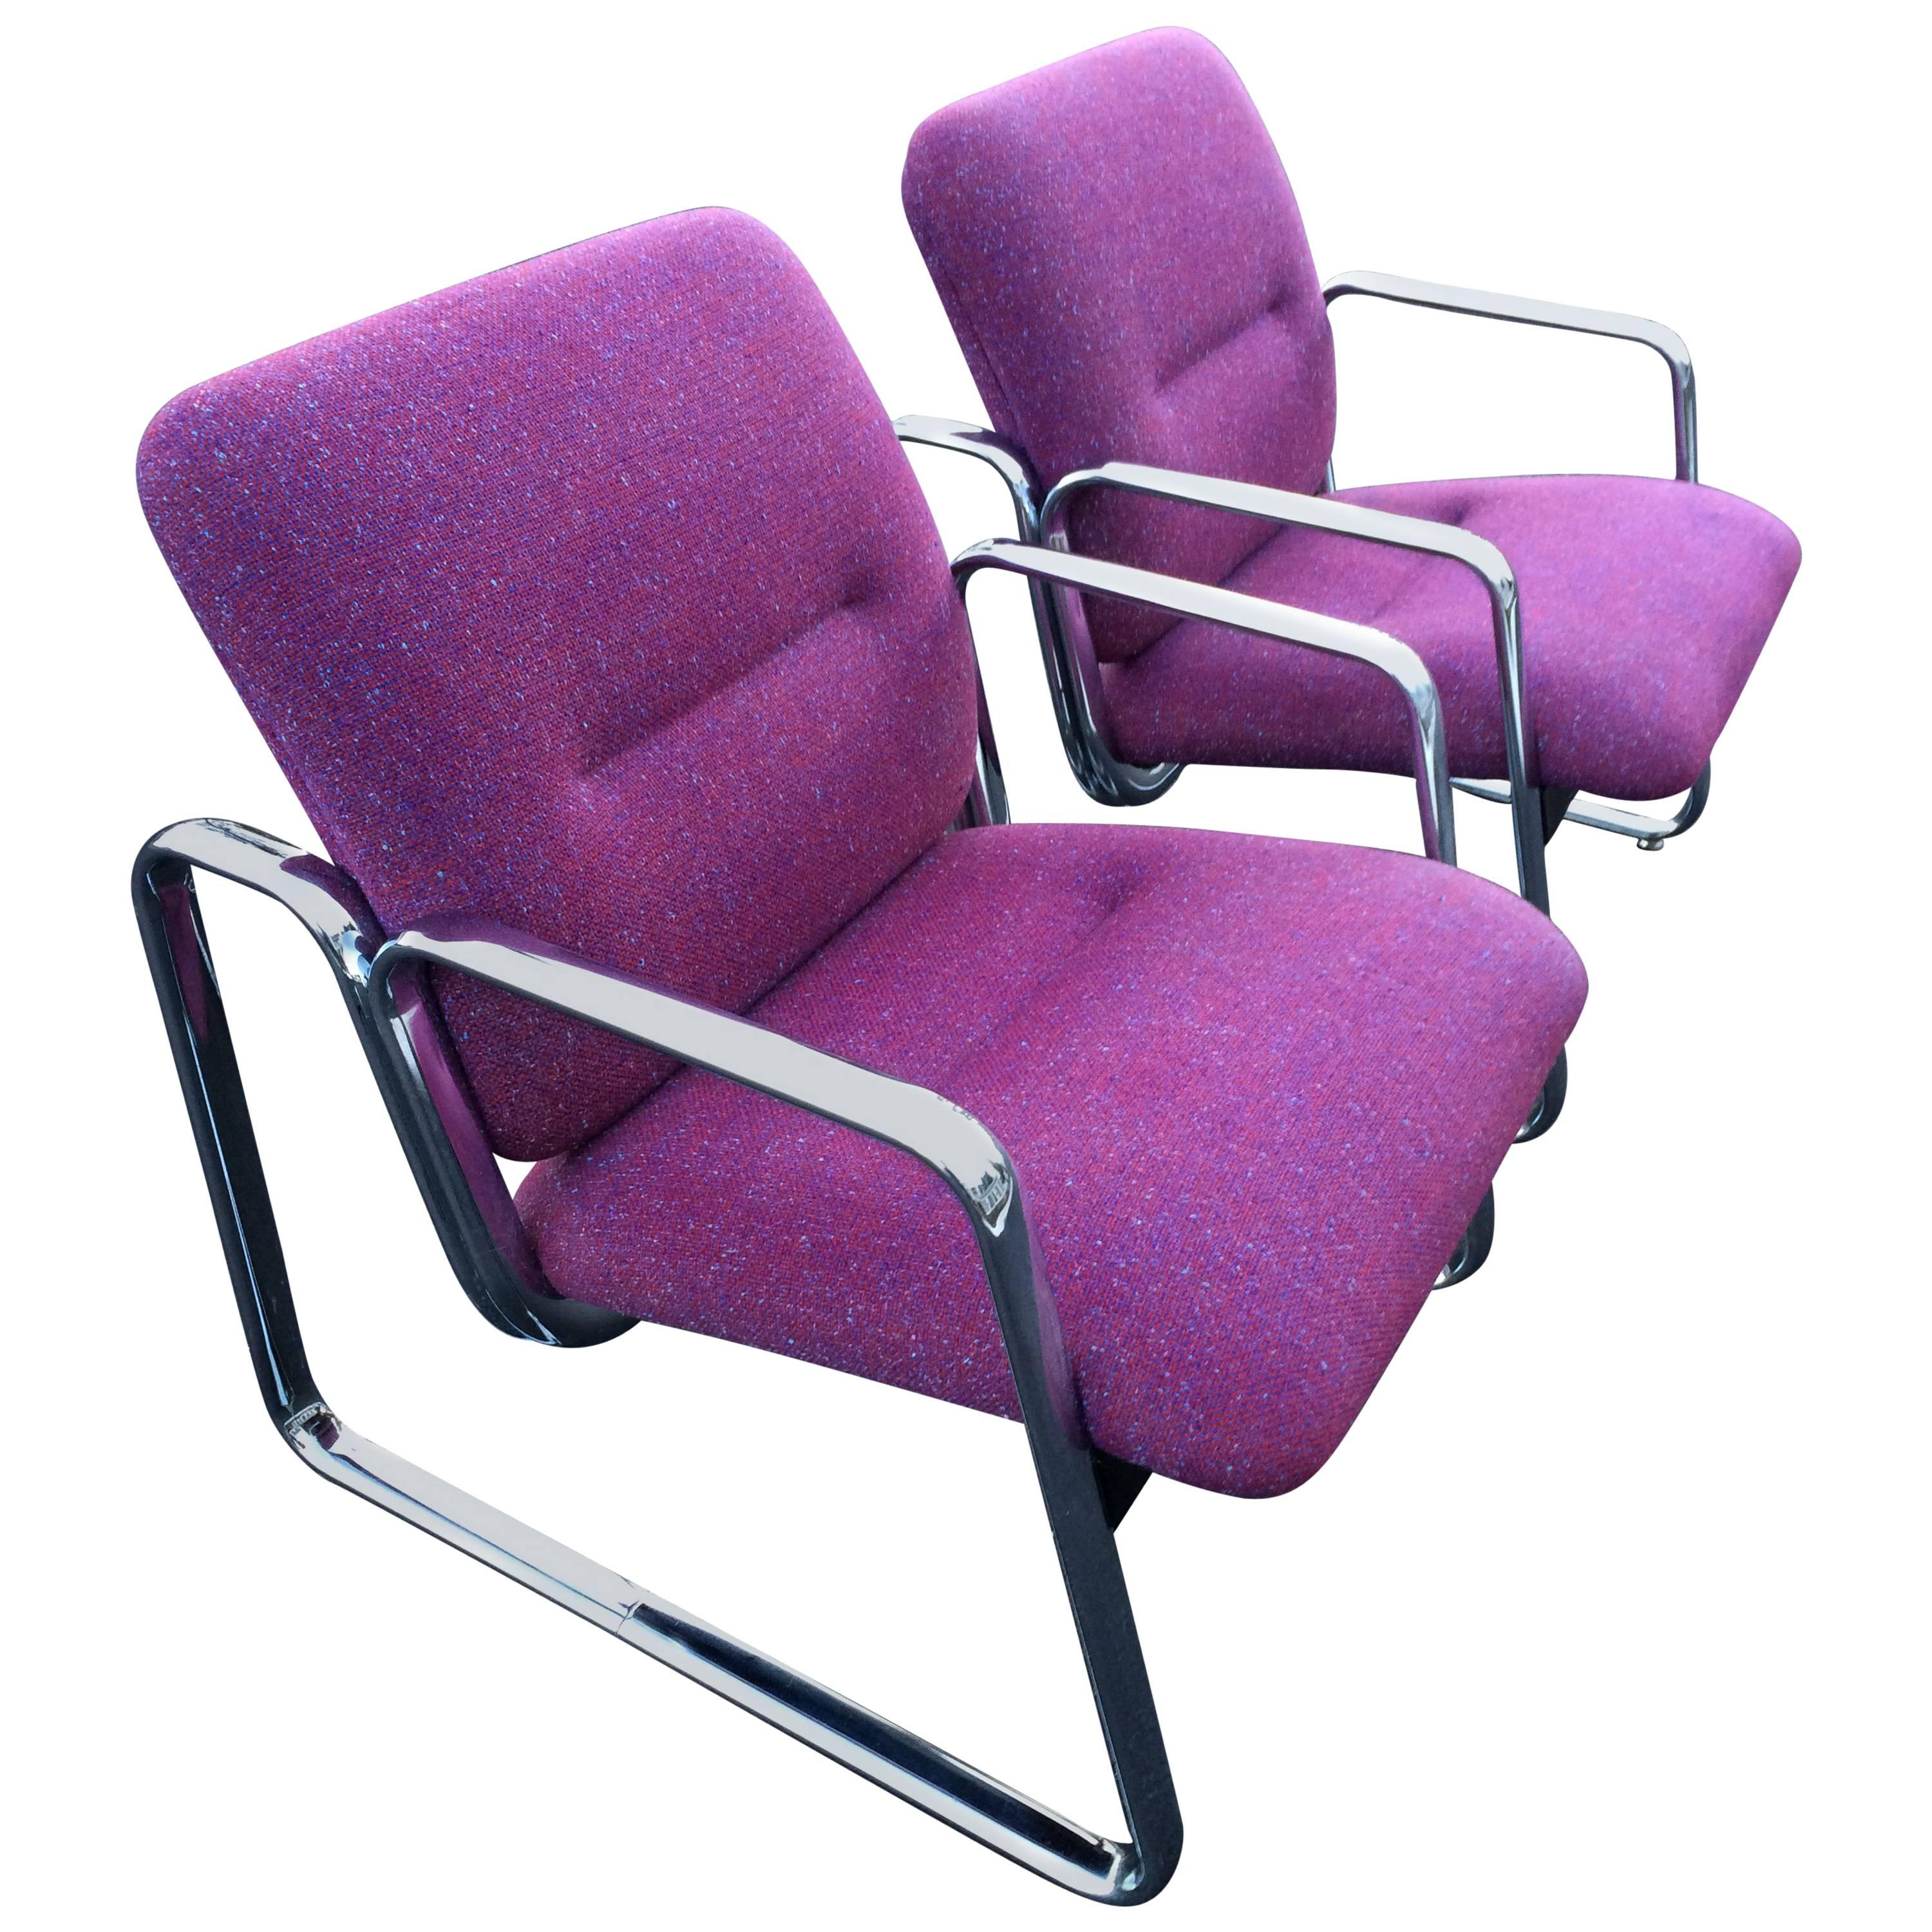 Pair of Chrome Steelcase Chairs in Violet